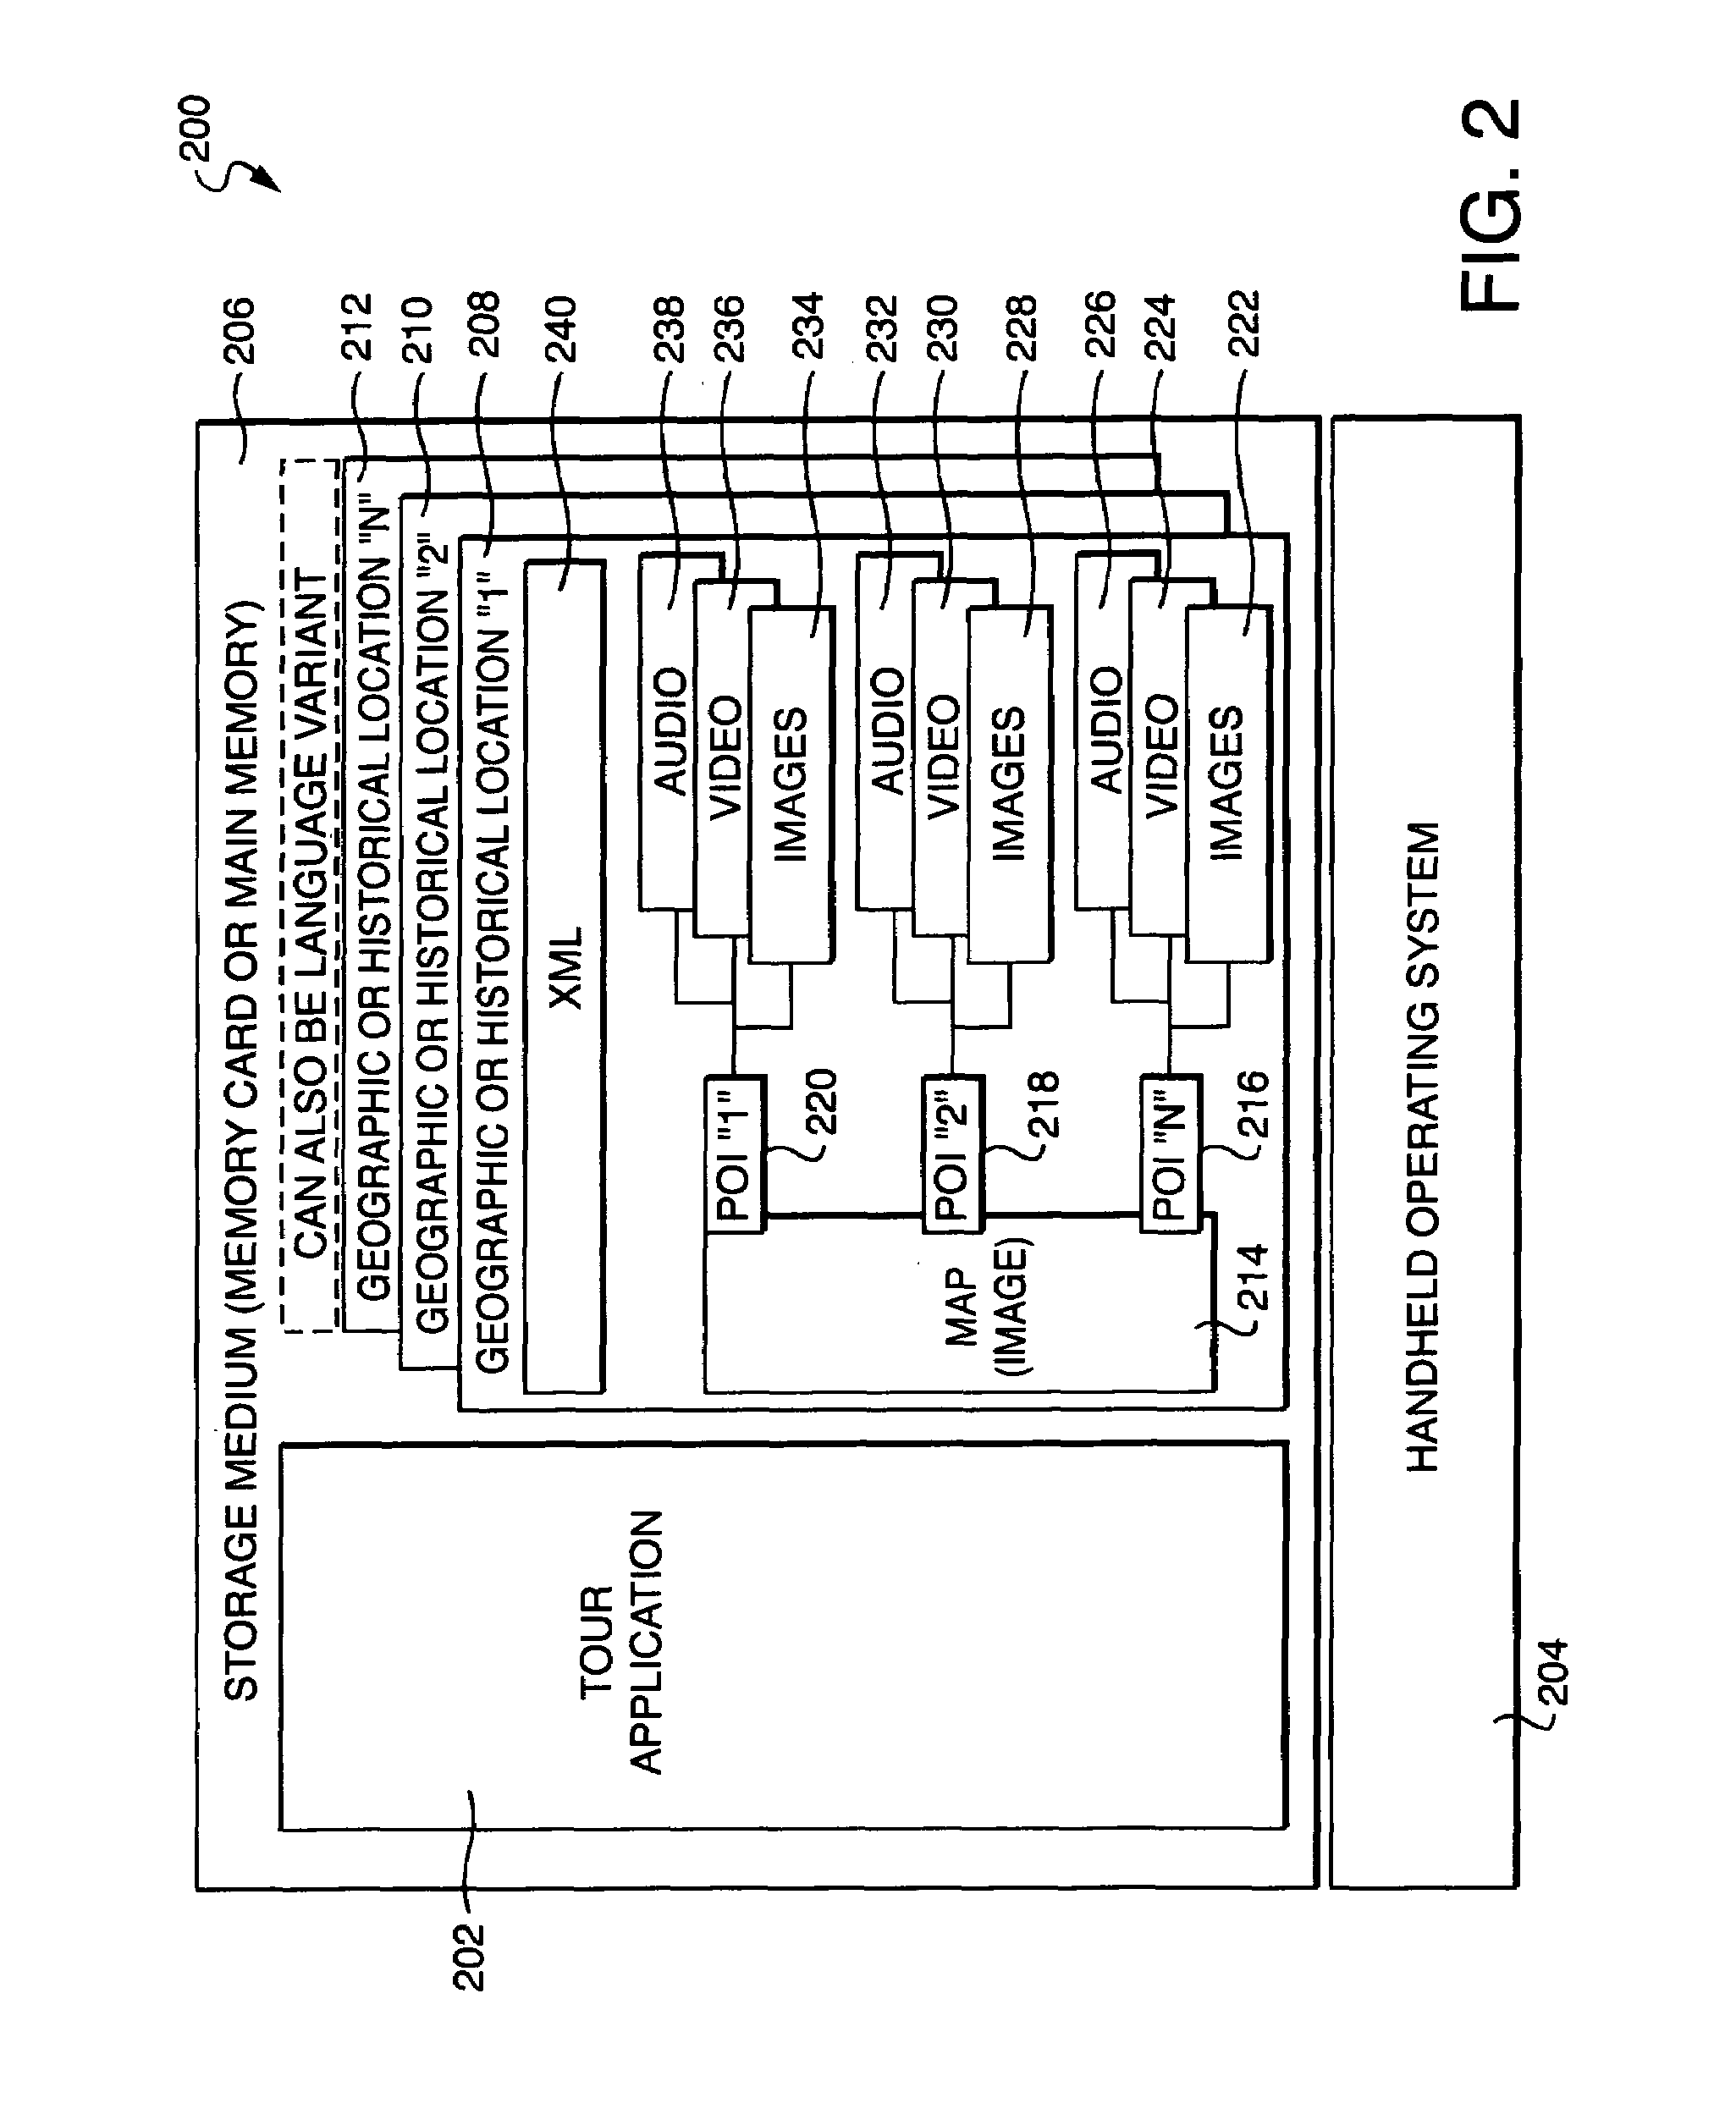 Apparatus and method for guided tour